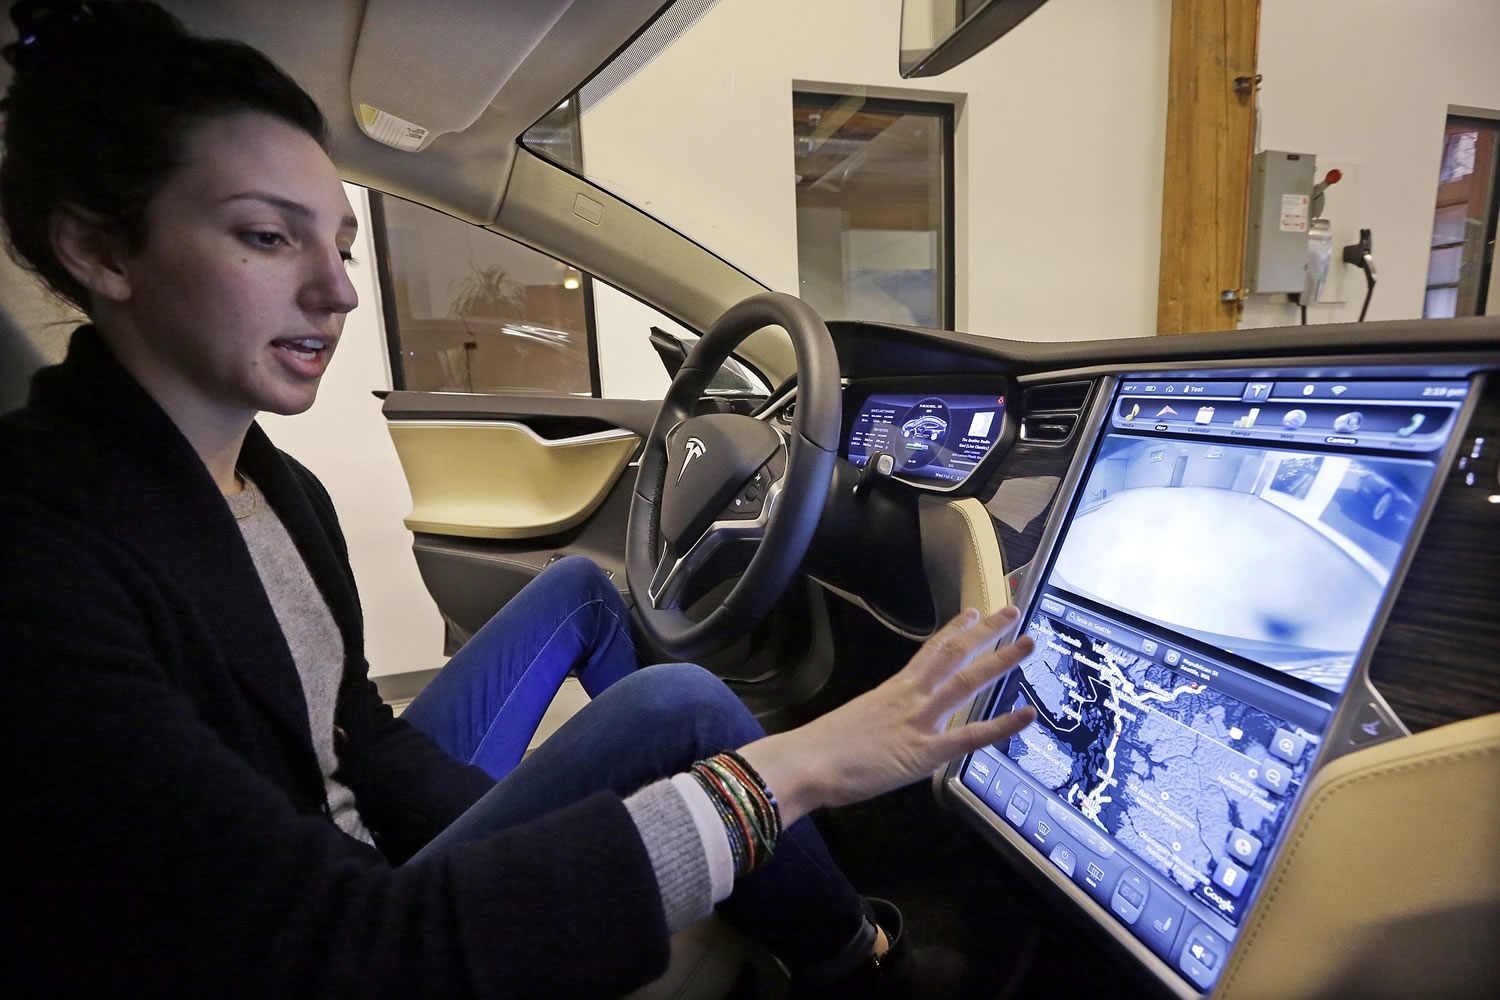 Tesla product specialist Kat Brand explains the control panel on the electric car at a dealership for the vehicle Wednesday in Seattle.